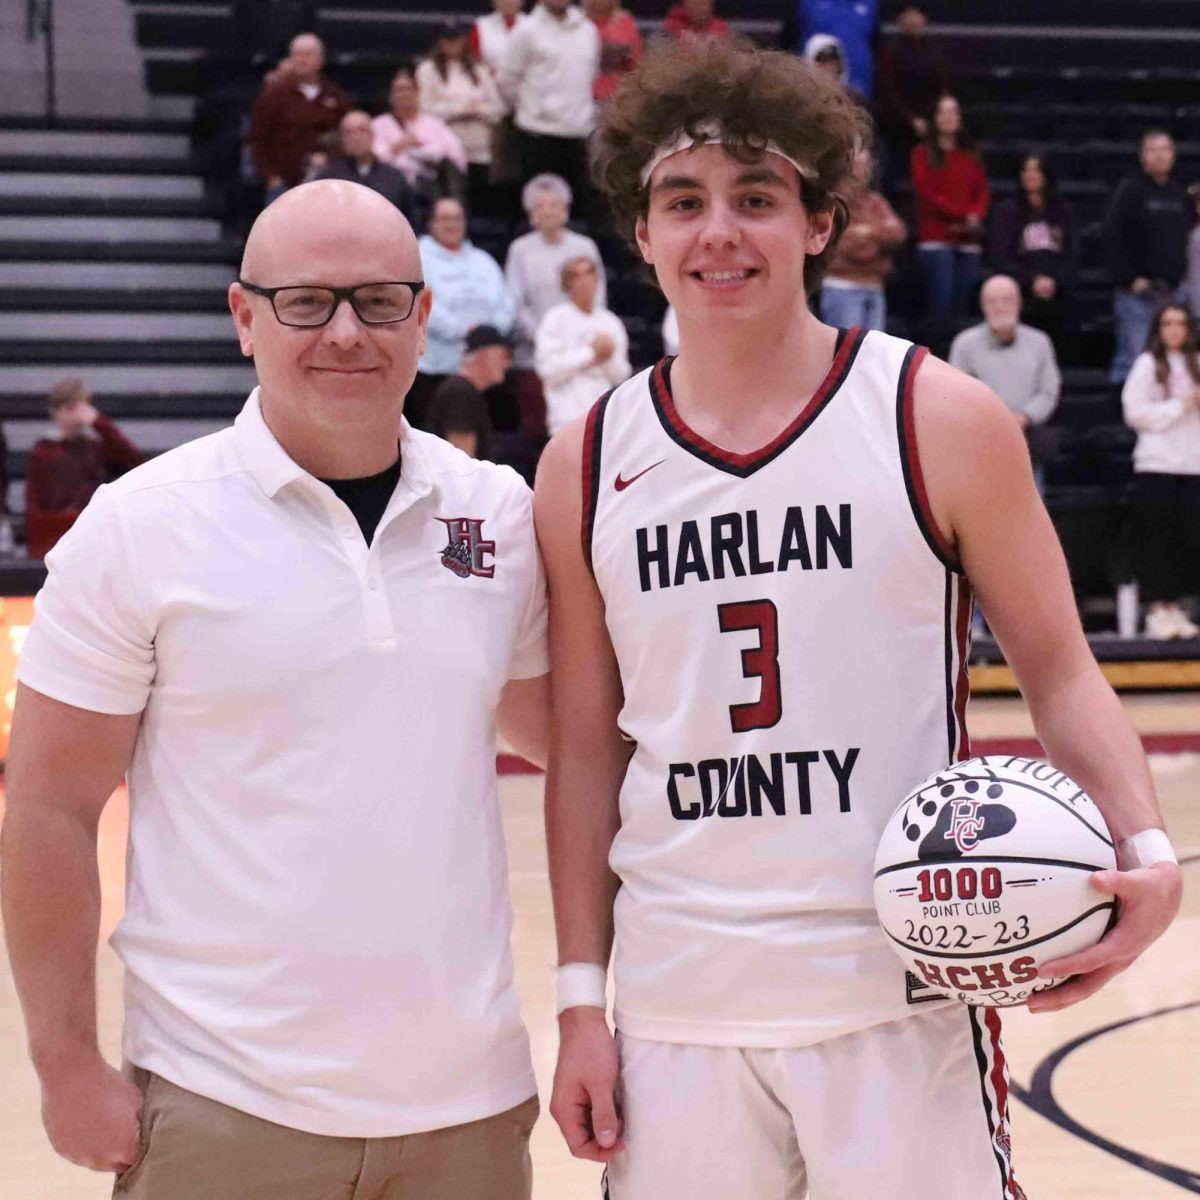 Harlan+County+junior+guard+Maddox+Huff+was+honored+before+the+Bears+game+Saturday+against+Ashland+Blazer+for+joining+the+schools+1%2C000-point+club+in+last+years+13th+Region+Tournament.+Huff+is+pictured+with+HCHS+coach+Kyle+Jones.